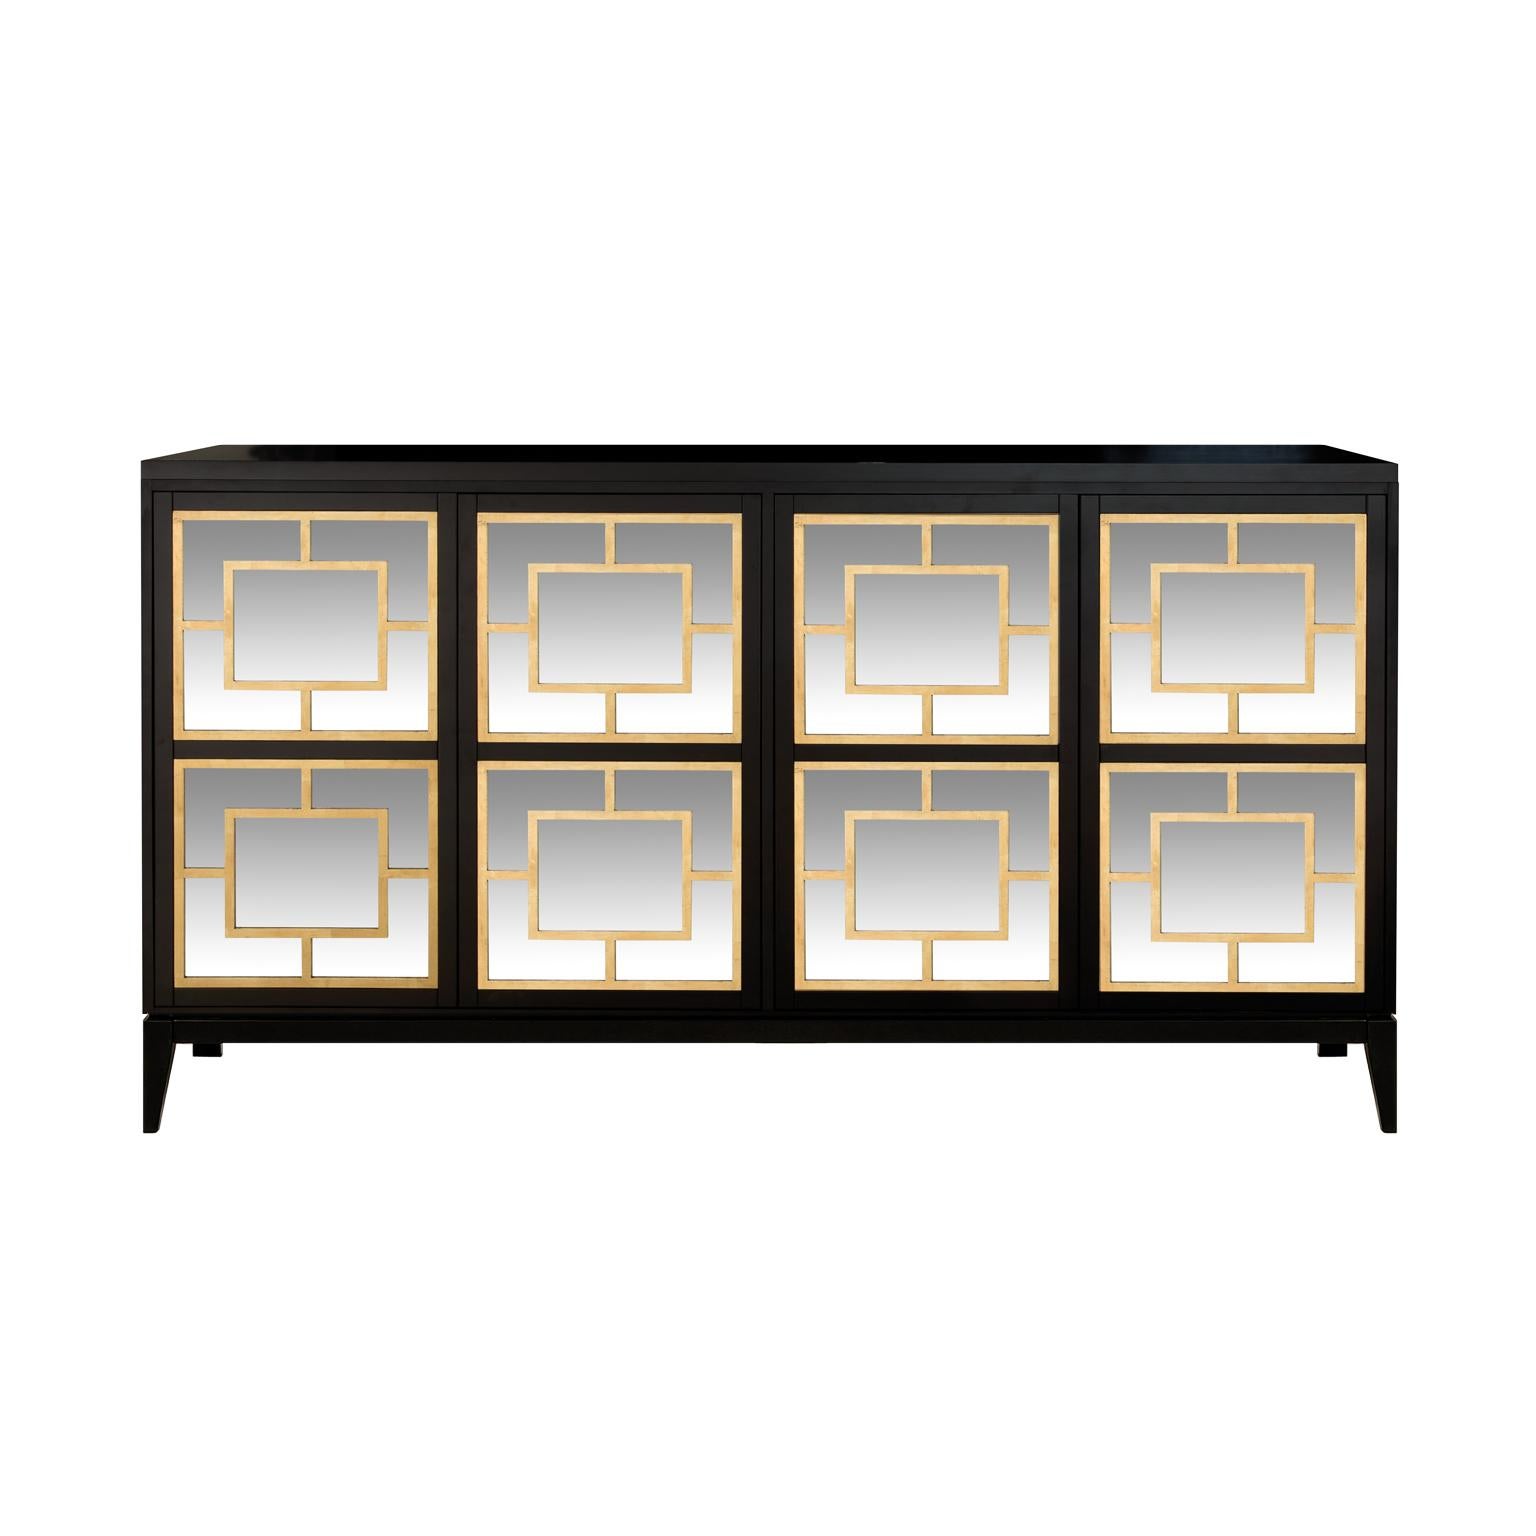 Designed by IC and and expertly crafted by Italian artisans, the Zoe sideboard features four mirrored doors adorned with geometric patterns in gold leaf. The body lays on tapered legs that give it a timeless look.
Finish: dark mocha lacquered and